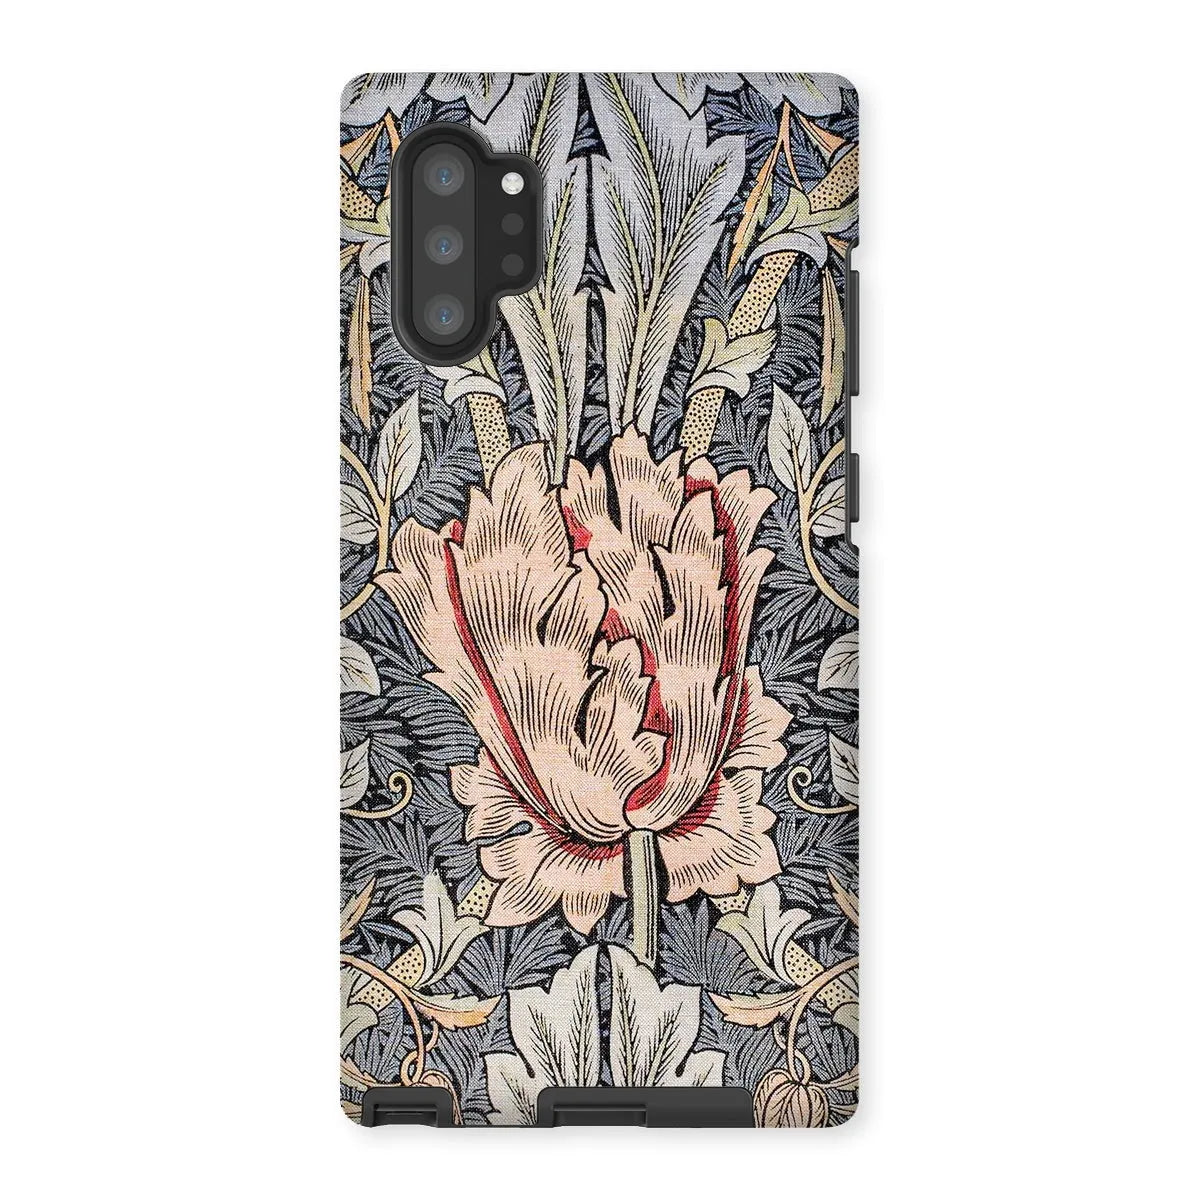 Honeysuckle Arts And Crafts Movement Phone Case - William Morris - Samsung Galaxy Note 10p / Matte - Mobile Phone Cases